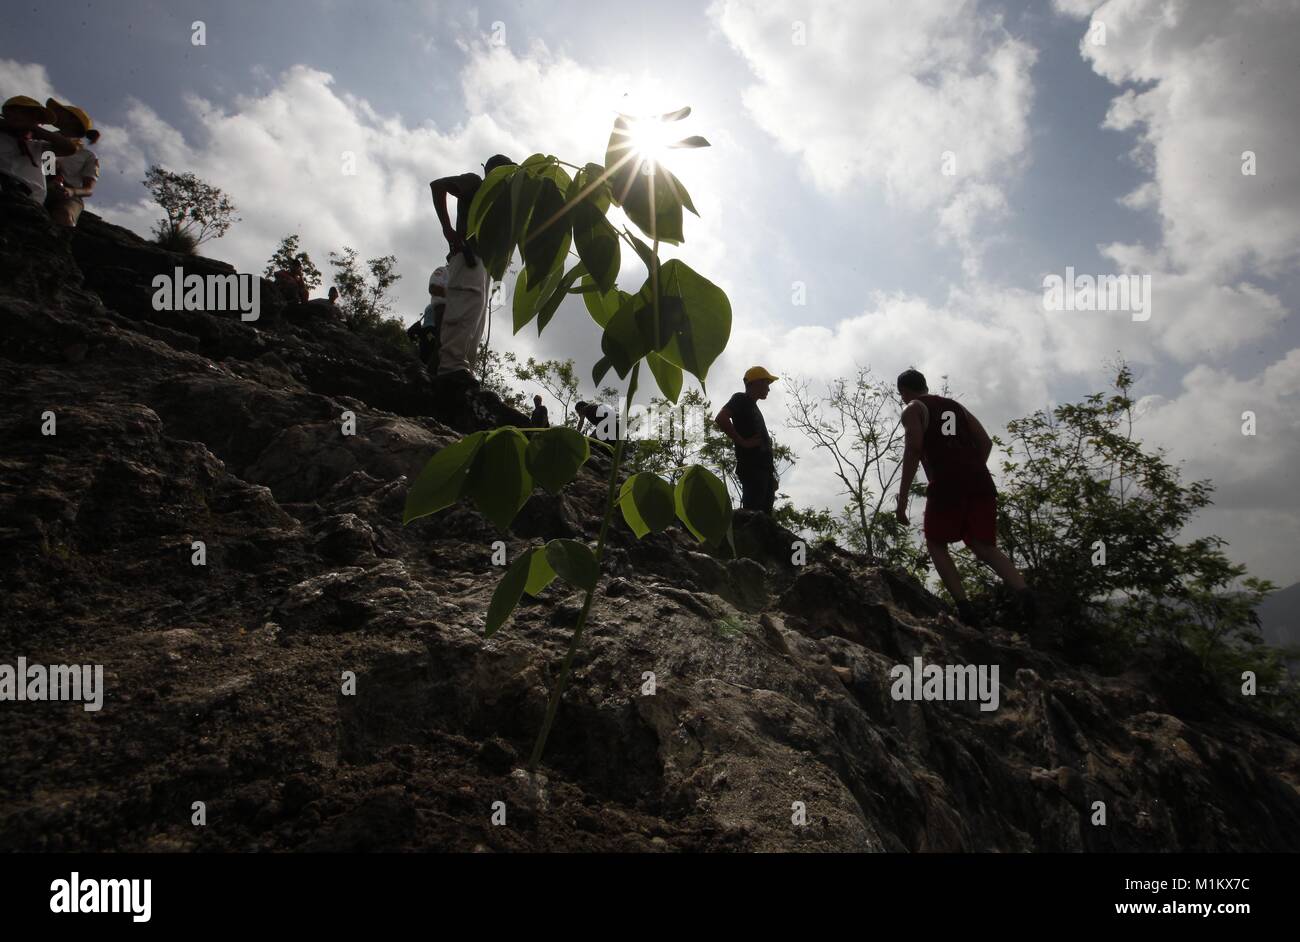 May 27, 2012 - Valencia, Carabobo, Venezuela - June 04, 2012. Volunteer groups participate in a reforestation campaign on the Casupo hill, carried out on May 27, with trees sprouted in the Fernando Pe''“alver park nursery. Fernando Pe''“alver Park, founded in 1983, has 22 hectares for environmental recreation that promote the relationship between man and nature, is crossed by the river Cabriales, there are diverse ecosystems, and there is a great variety of flora and fauna species. The park depends on the state government of Carabobo, which minimizes maintenance costs through a nursery, as a s Stock Photo